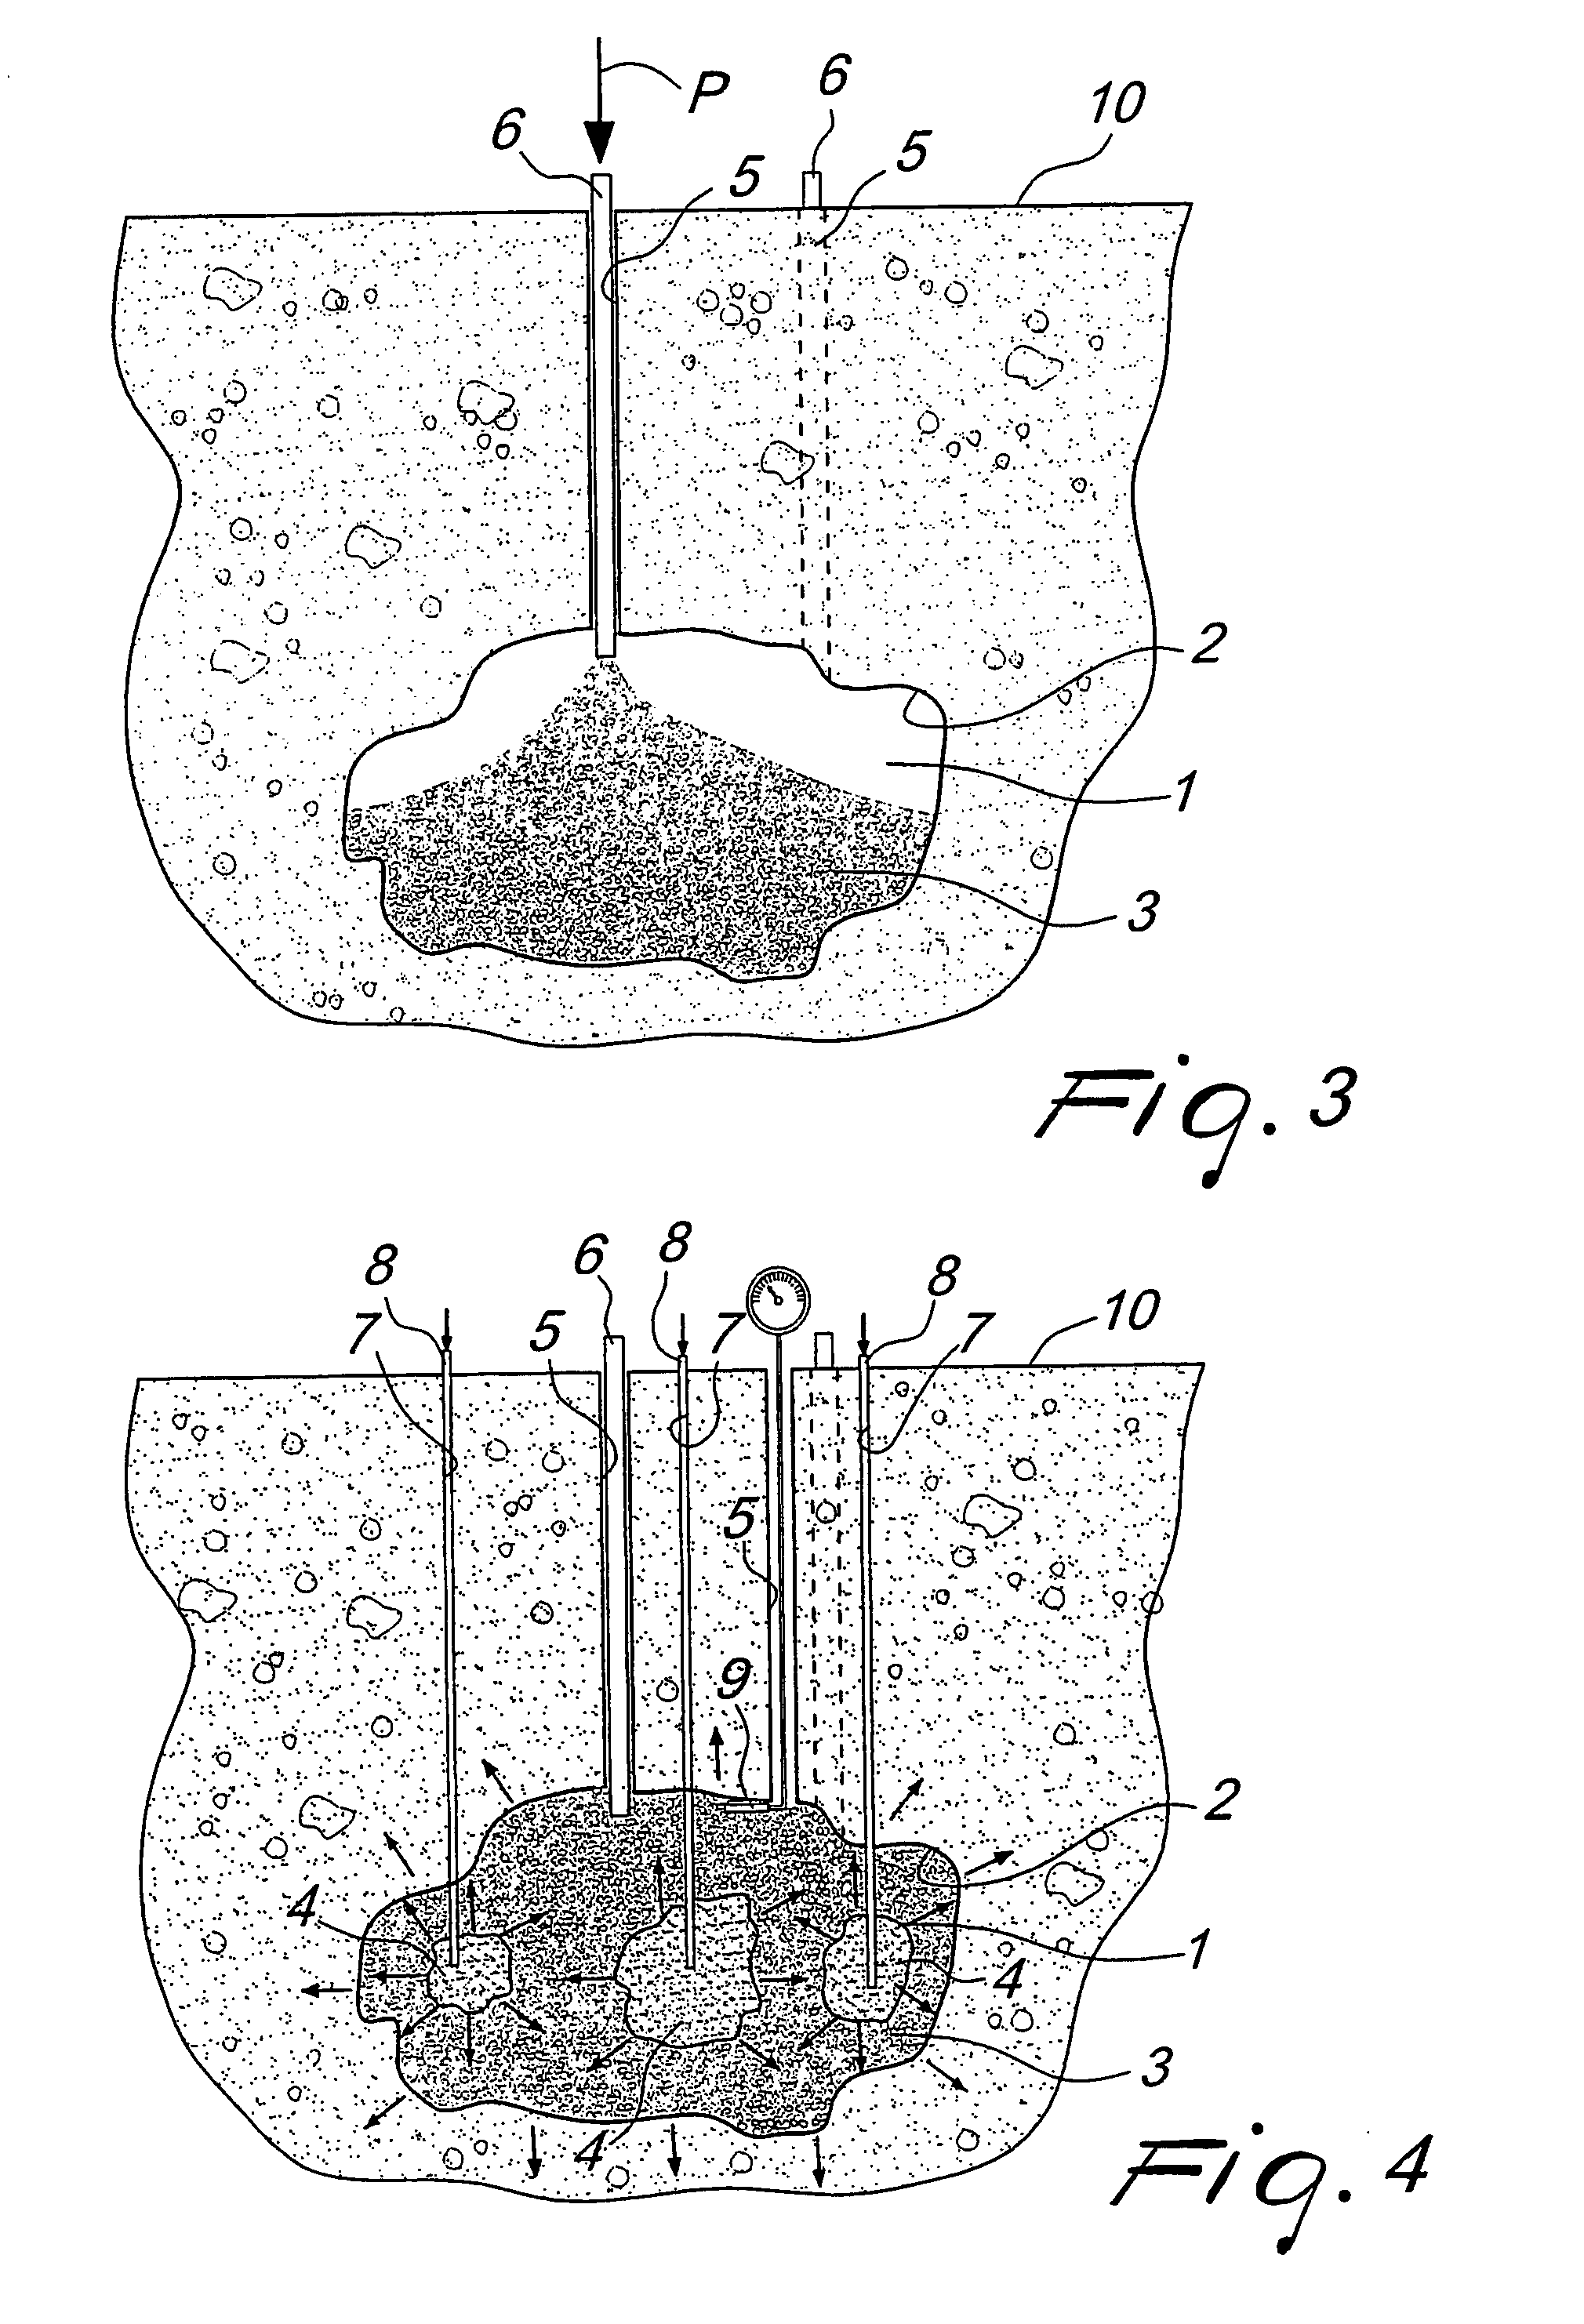 Method For Saturating Cavities Present in a Mass of Soil or In a Body in General